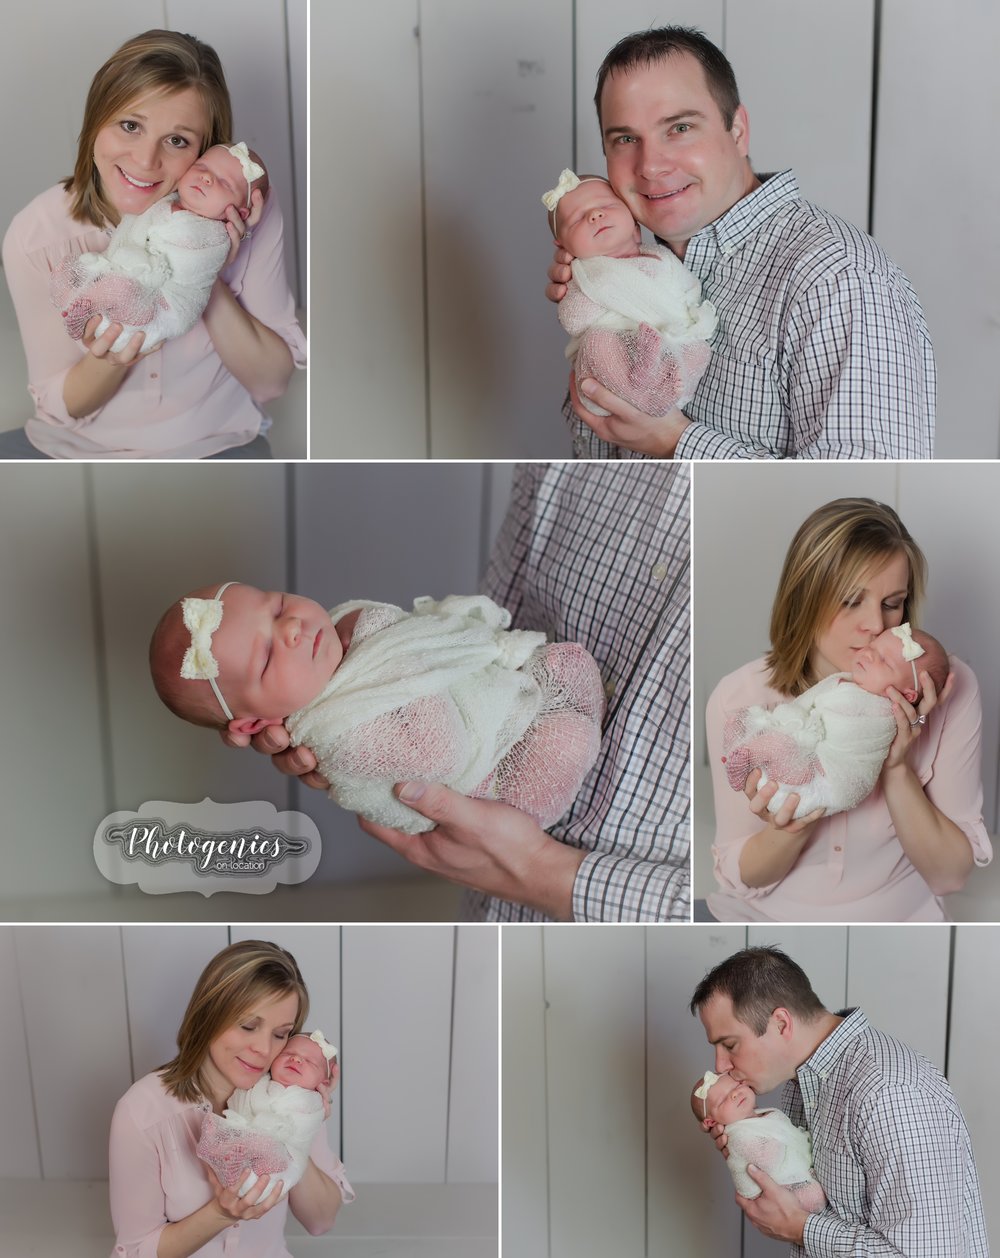  newborn_girl_sibling_photography_family_poses_ideas_props_studio_color_vibrant_unique_parents_mommy_daddy_baby_pose 